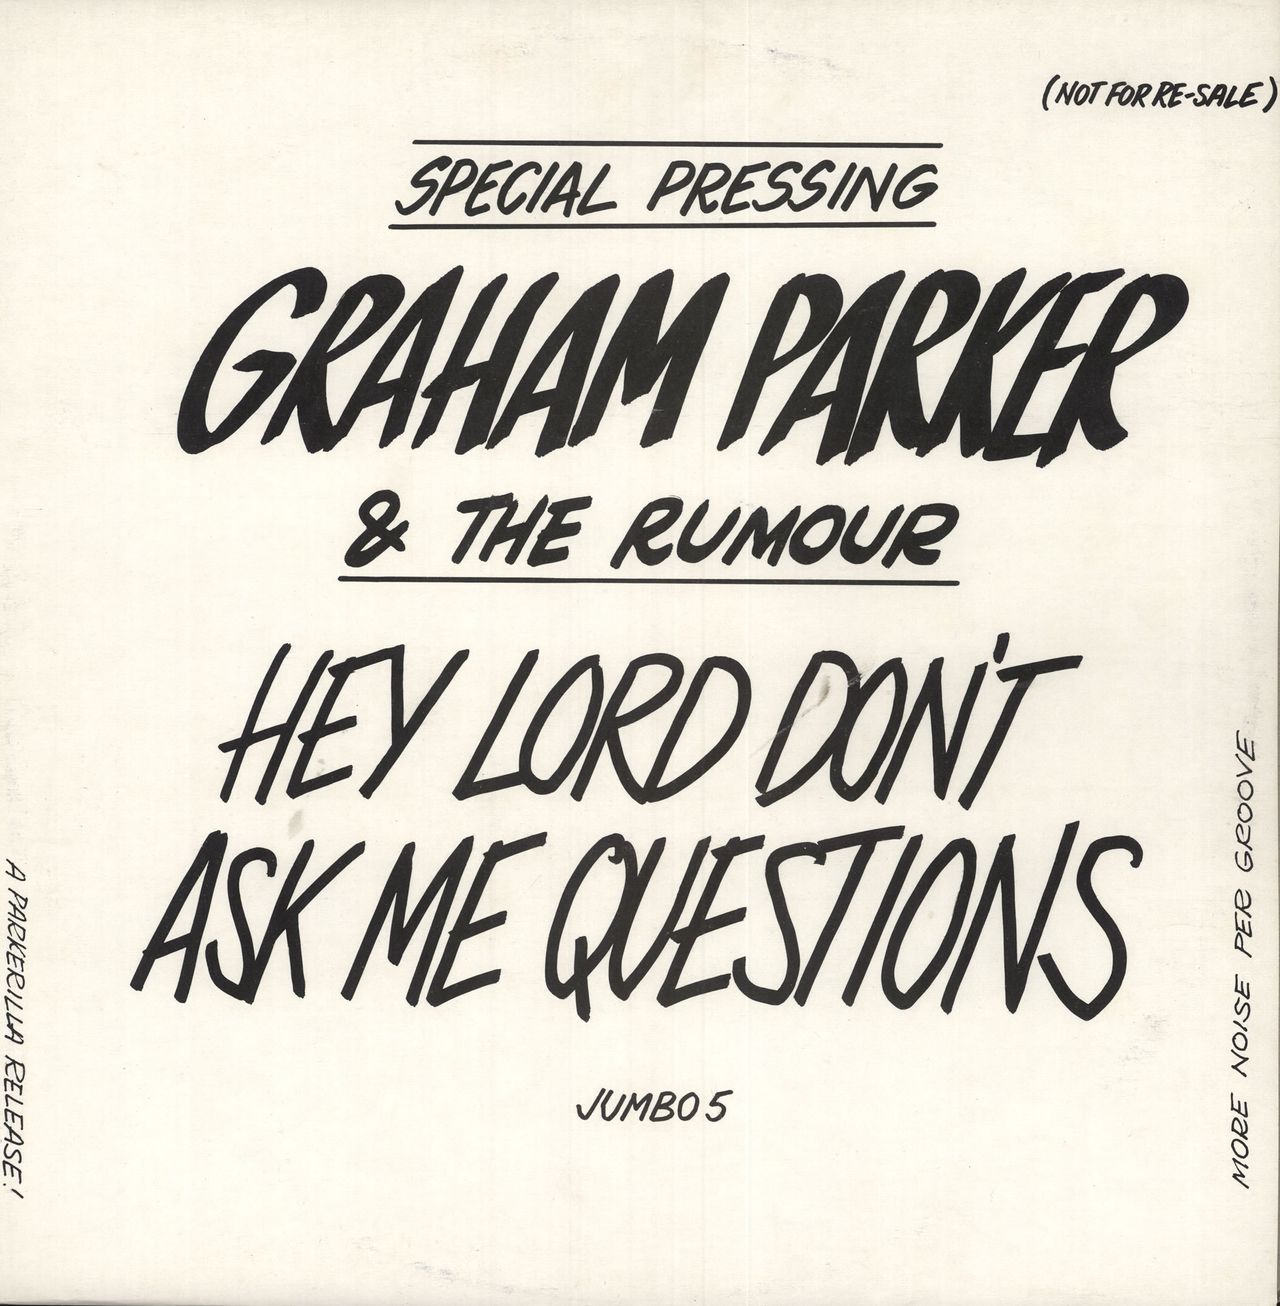 Graham Parker Hey Lord, Don't Ask Me Questions UK Promo 12" vinyl single (12 inch record / Maxi-single) JUMBO5